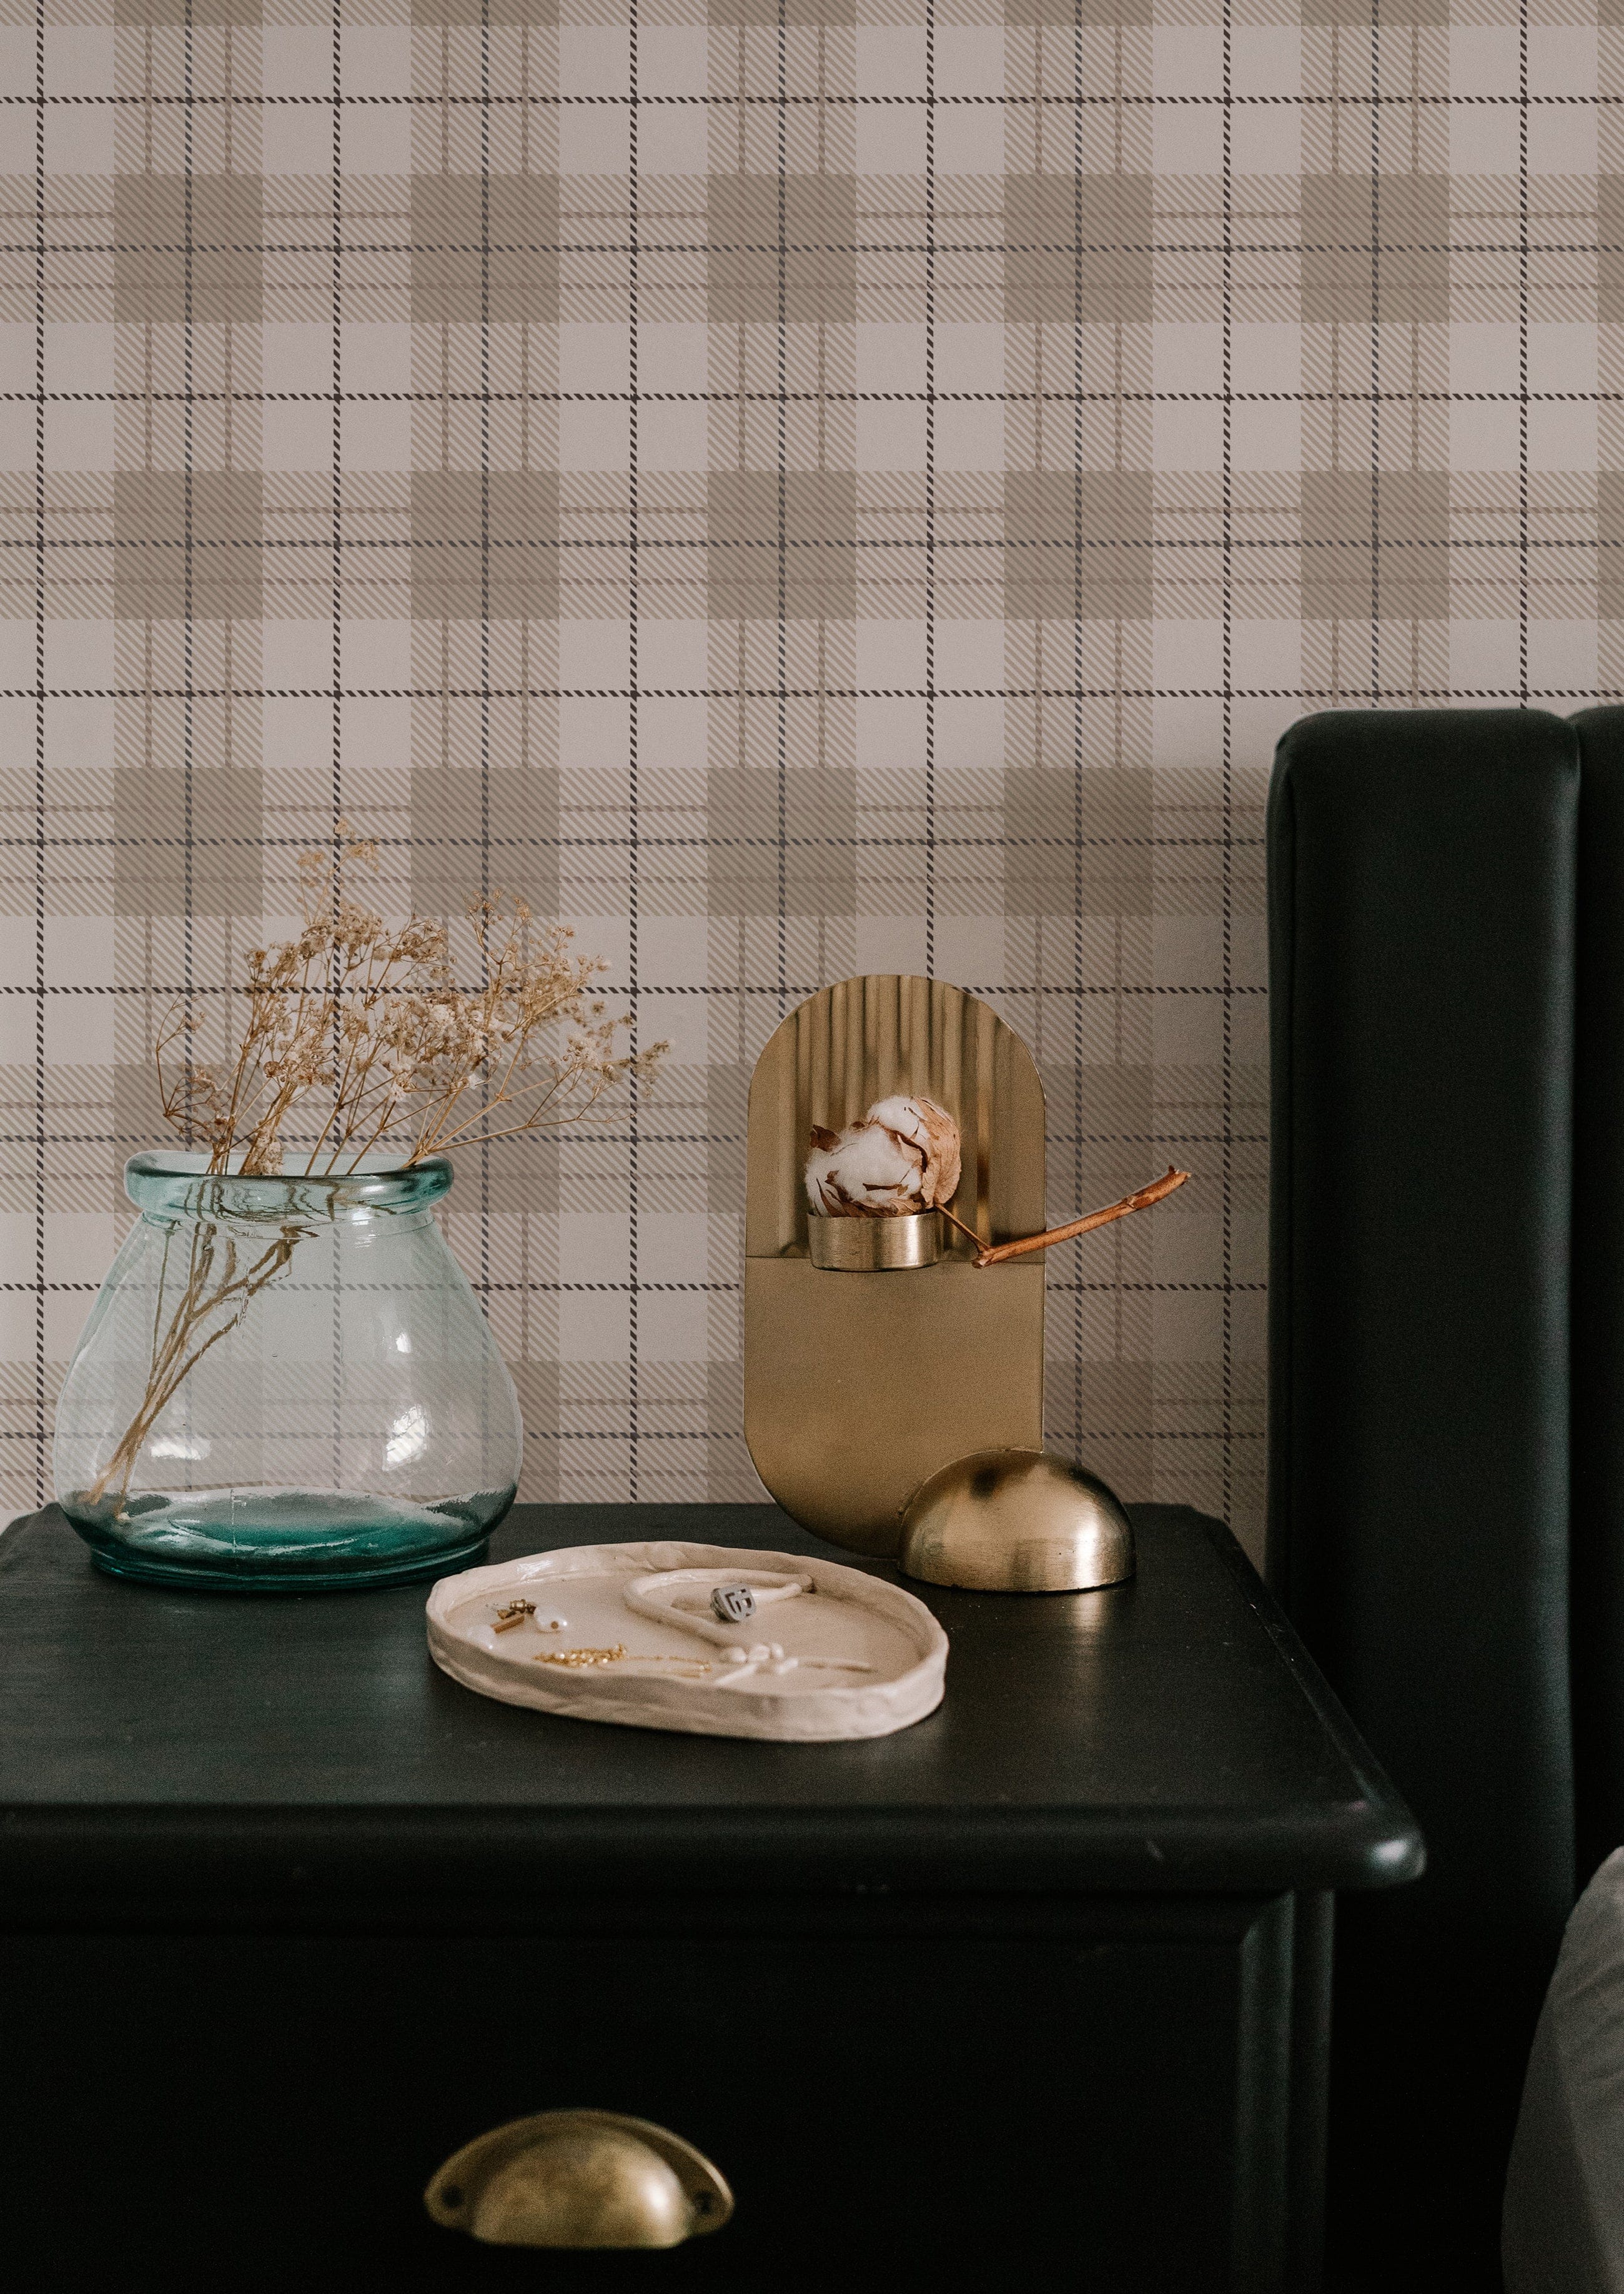 A minimalist setting with a modern black bedside table against Winter Plaid Wallpaper. The plaid design combines classic lines and warm neutral tones that add texture and a welcoming feel to the space, complemented by simple, elegant decor items on the table.